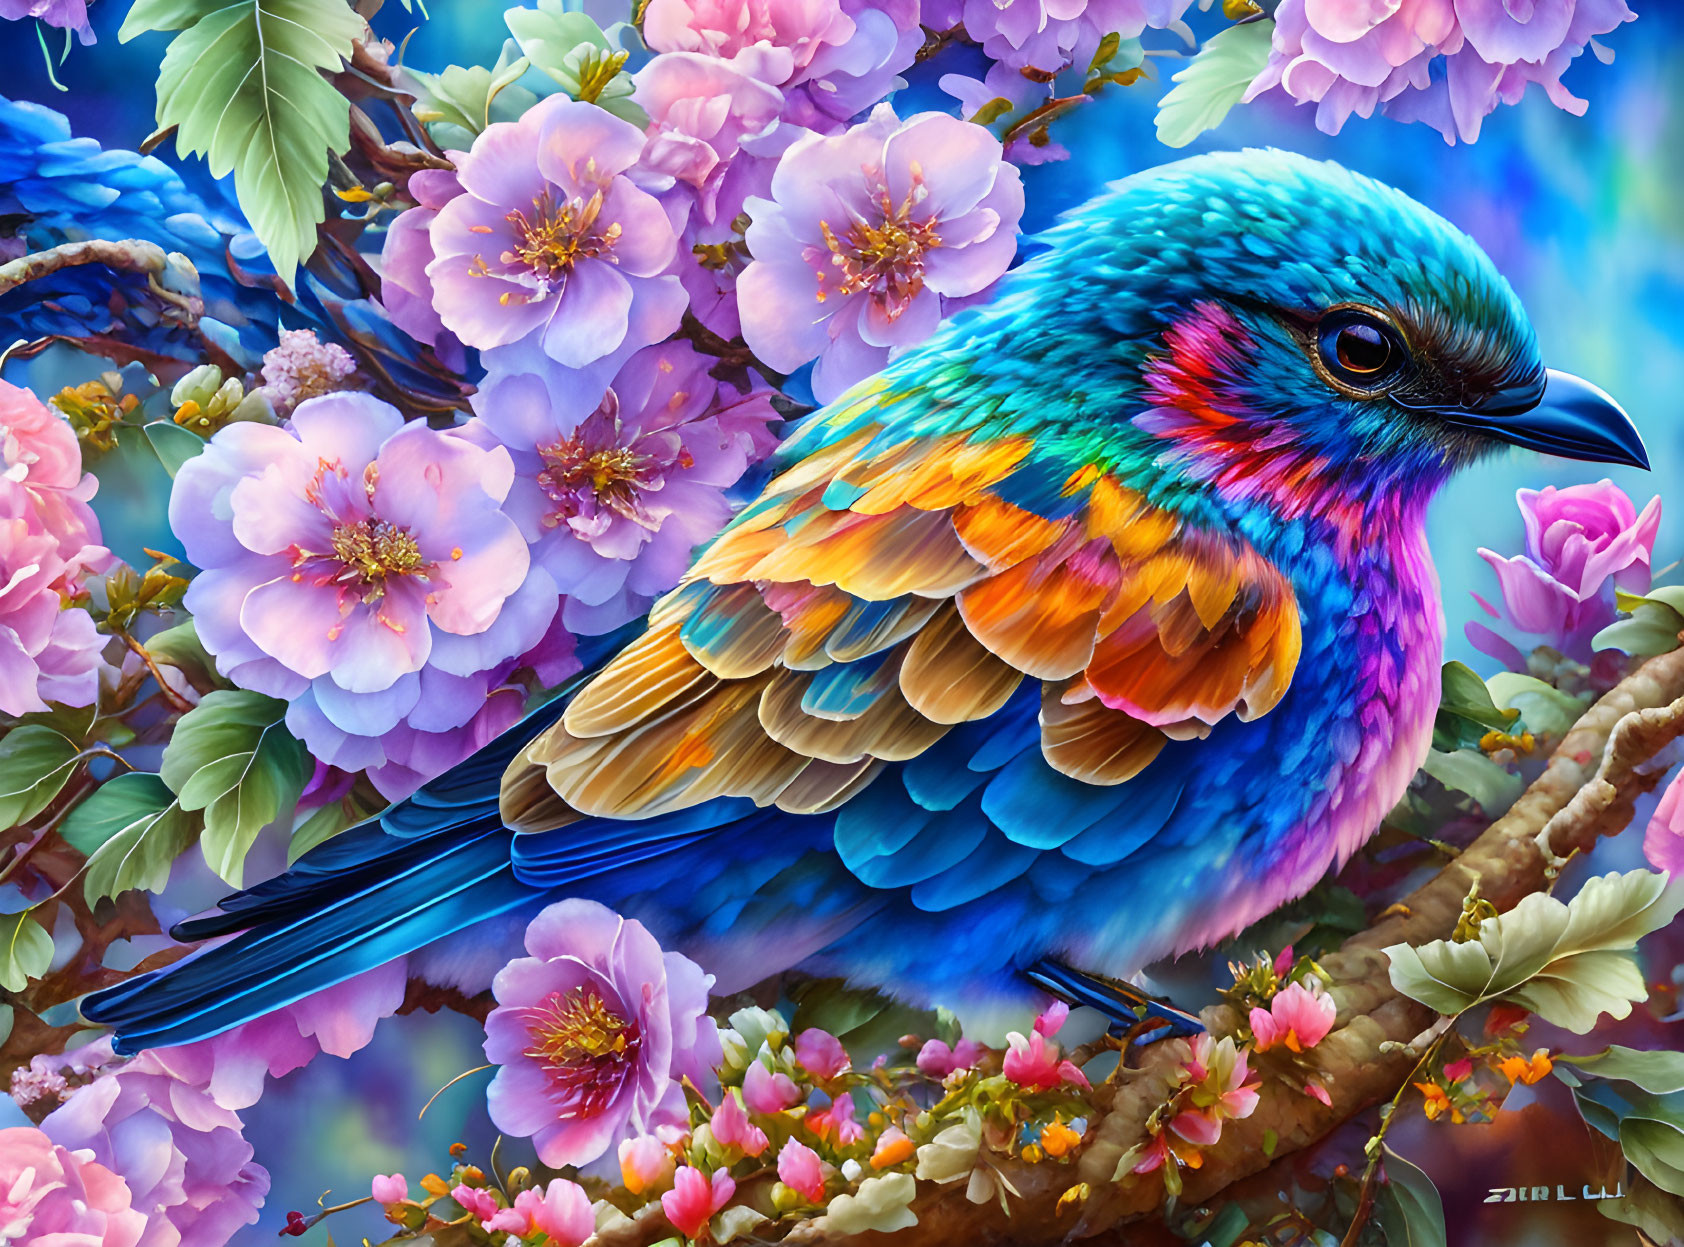 Colorful Bird Surrounded by Cherry Blossoms in Tranquil Scene